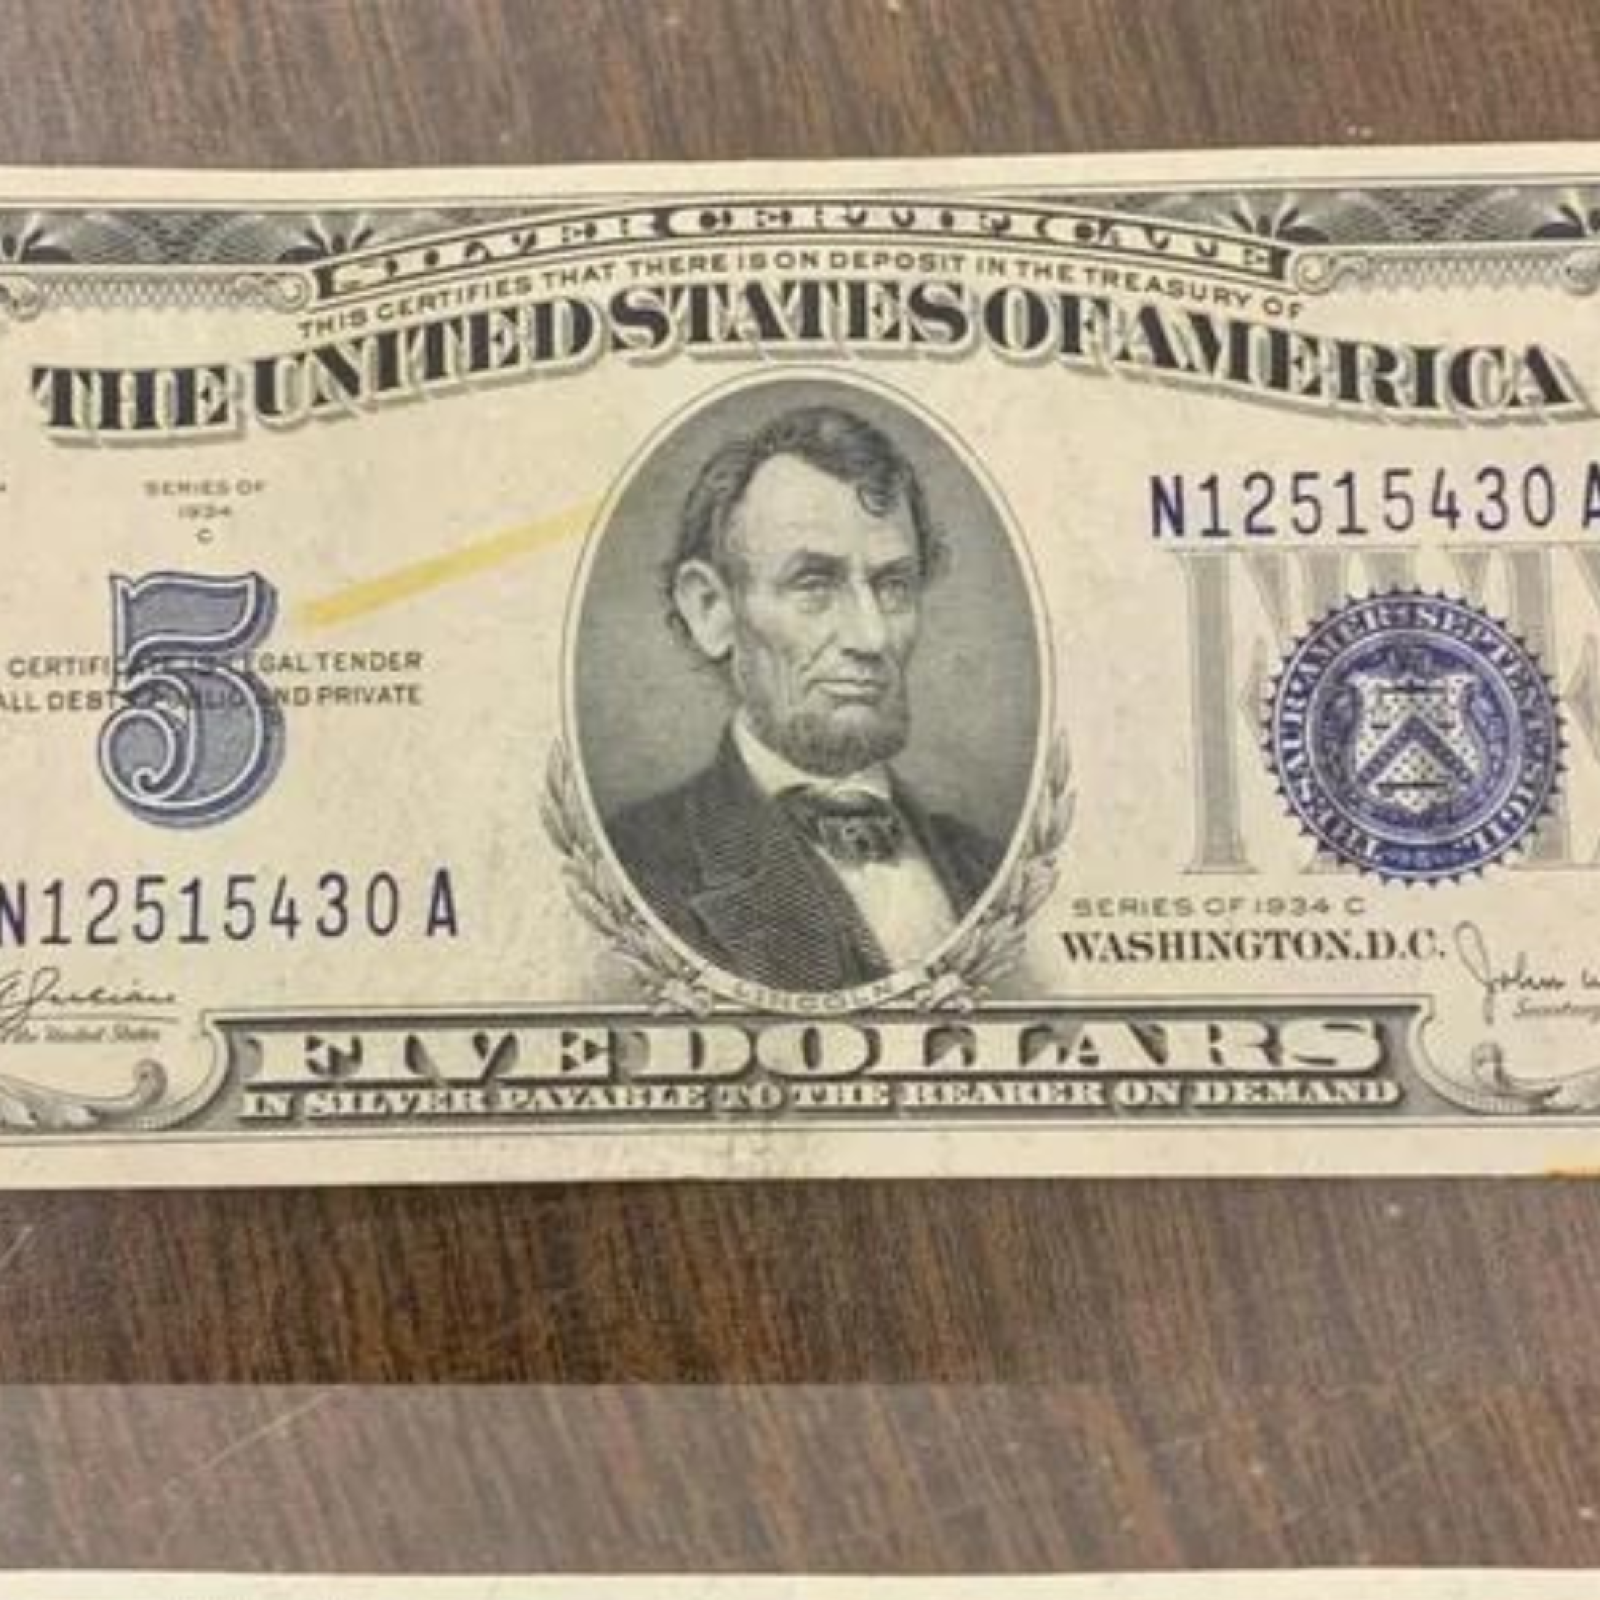 RARE UNIQUE $1 DOLLAR BILLS YOU SHOULD LOOK FOR THAT ARE WORTH MONEY! 